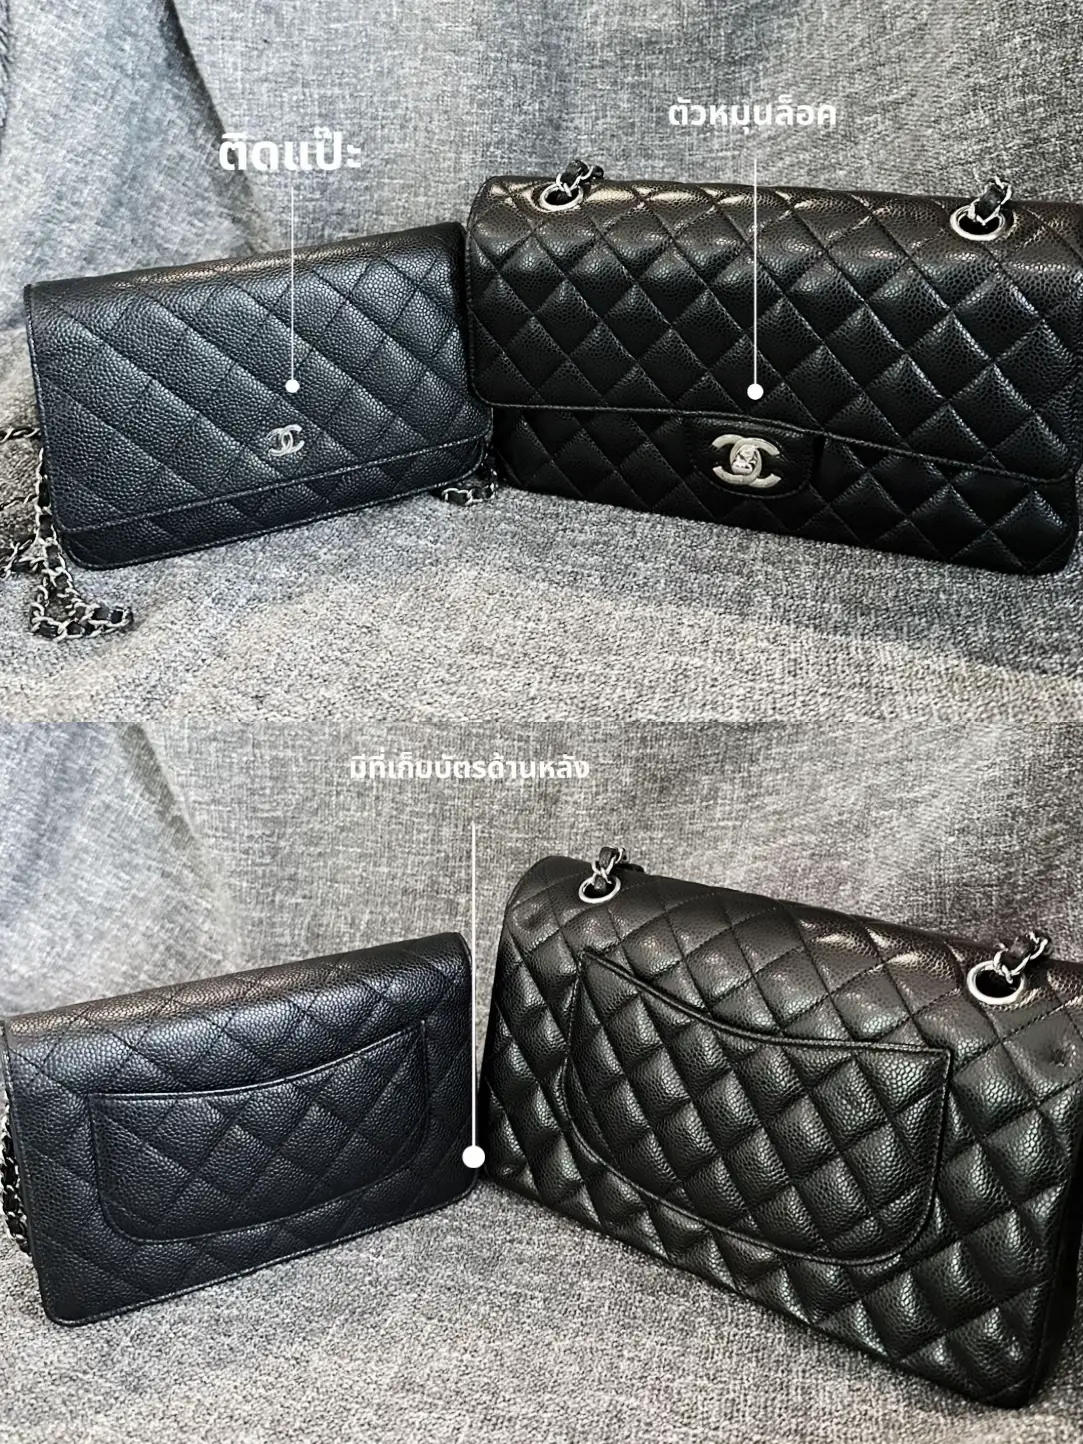 Compared Classic 10 Top Chanel Version vs Wallet on Chain